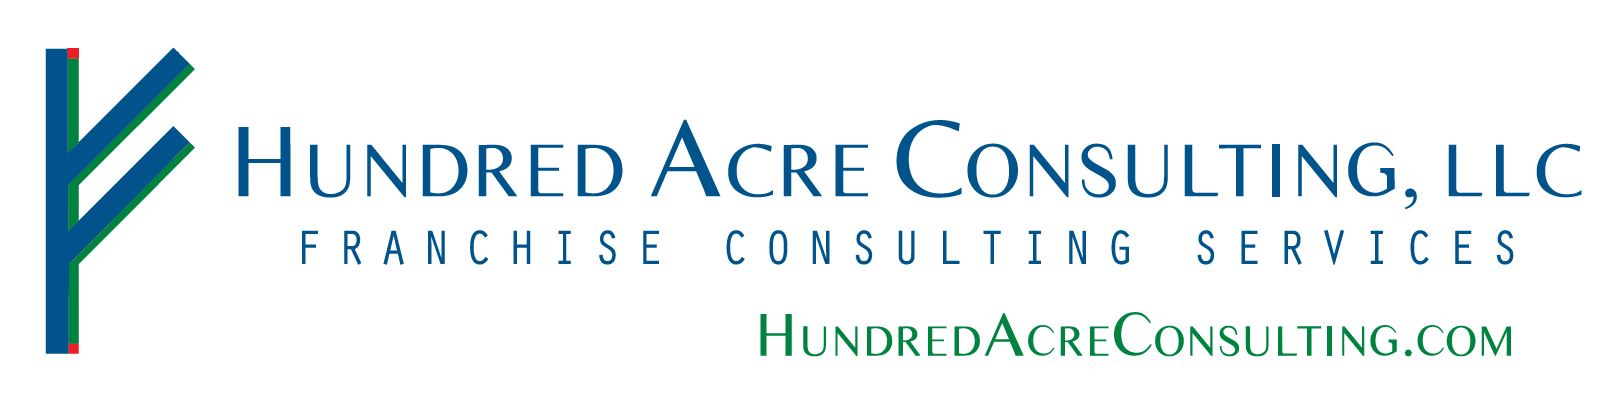 Hundred Acre Consulting, LLC